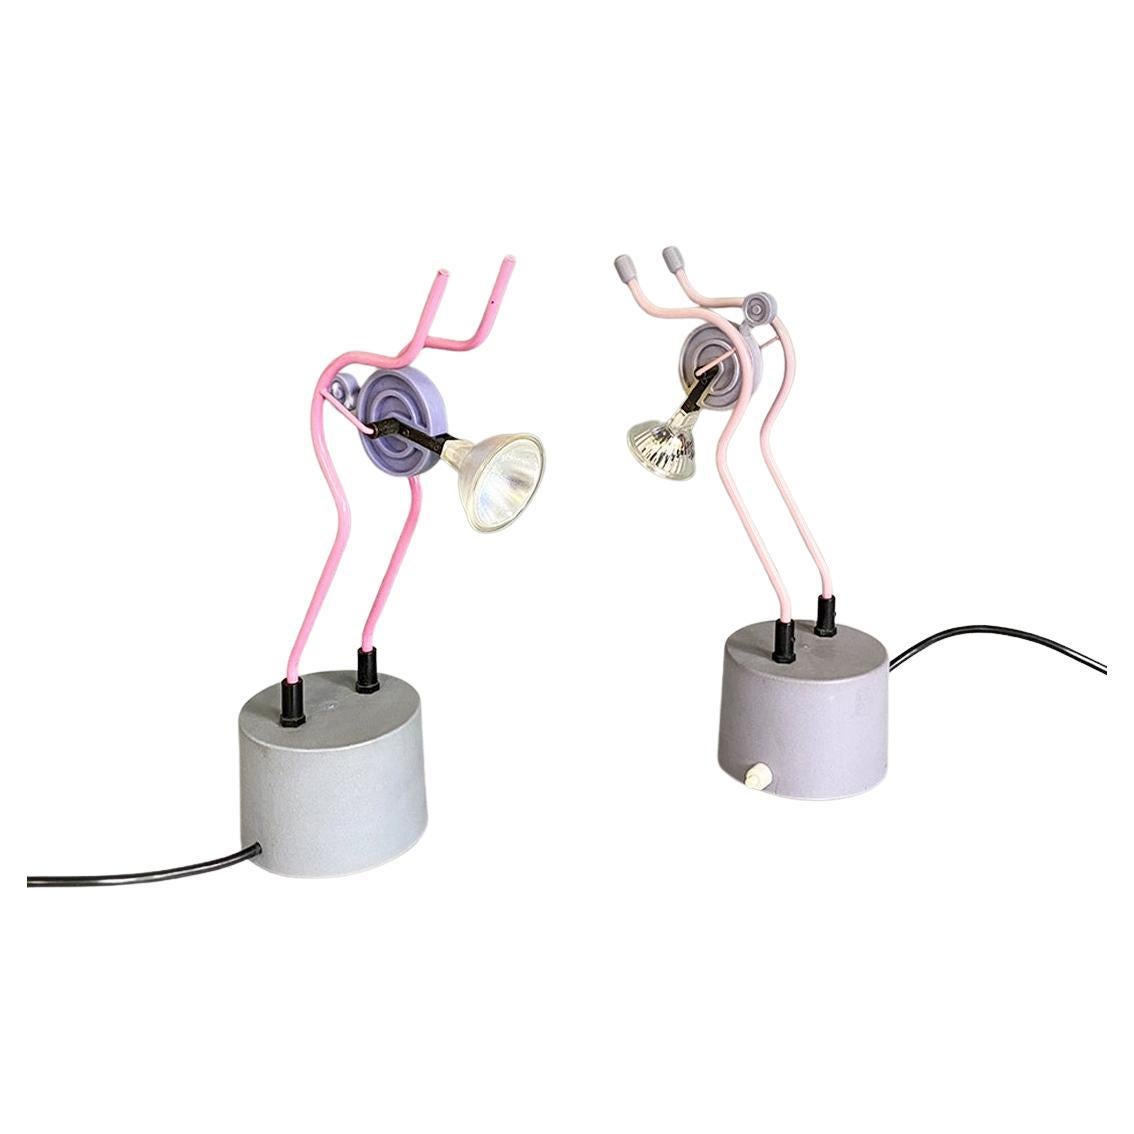 Italian Modern Pair of Pink Metal Sculpture Table Lamps, 1980s For Sale